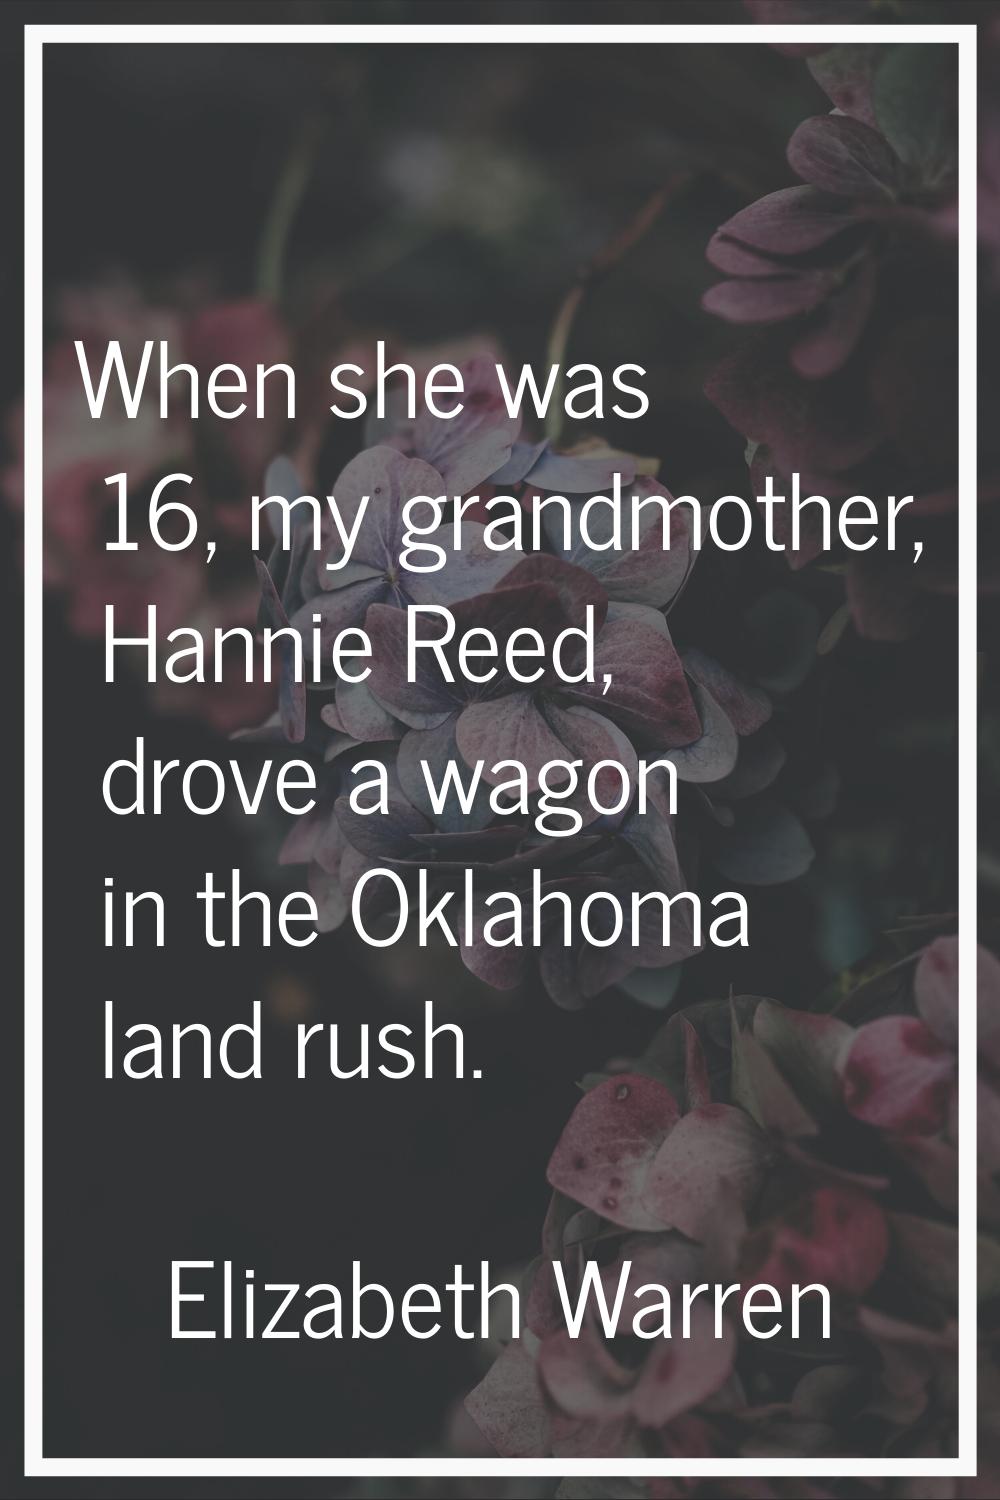 When she was 16, my grandmother, Hannie Reed, drove a wagon in the Oklahoma land rush.